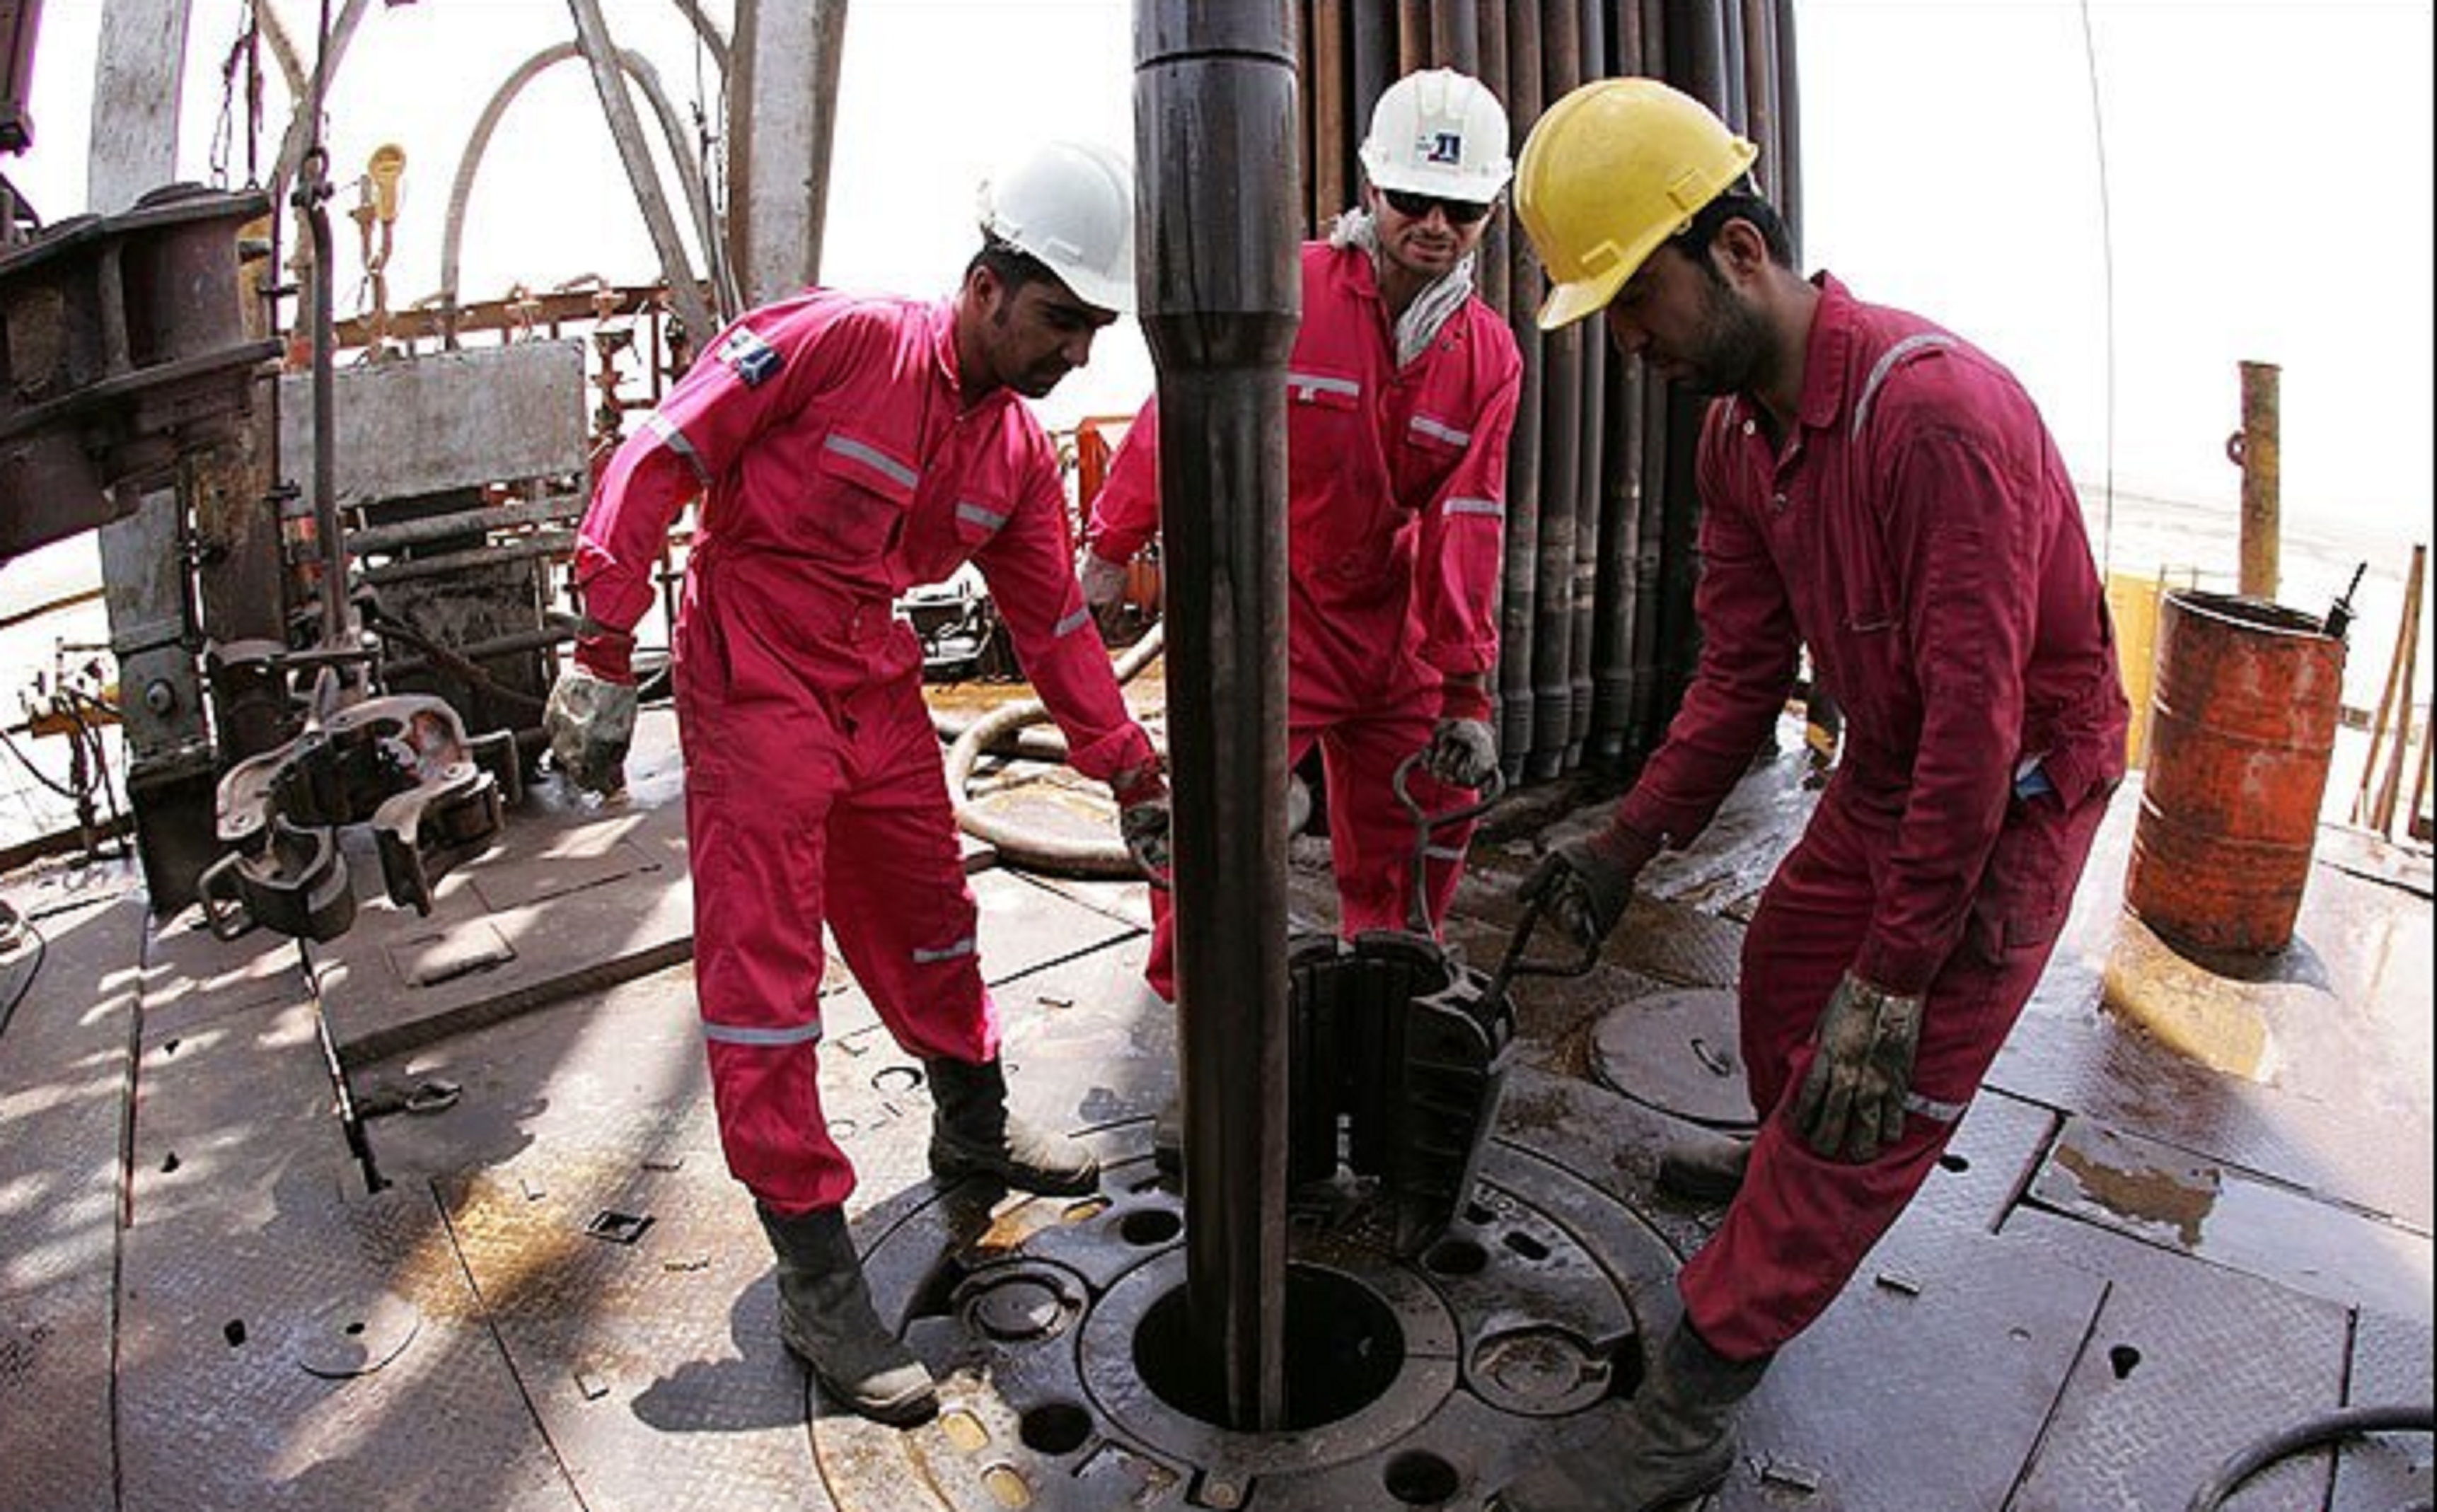 NIDC Drills 69,000 meters of Oil, Gas Wells Since March